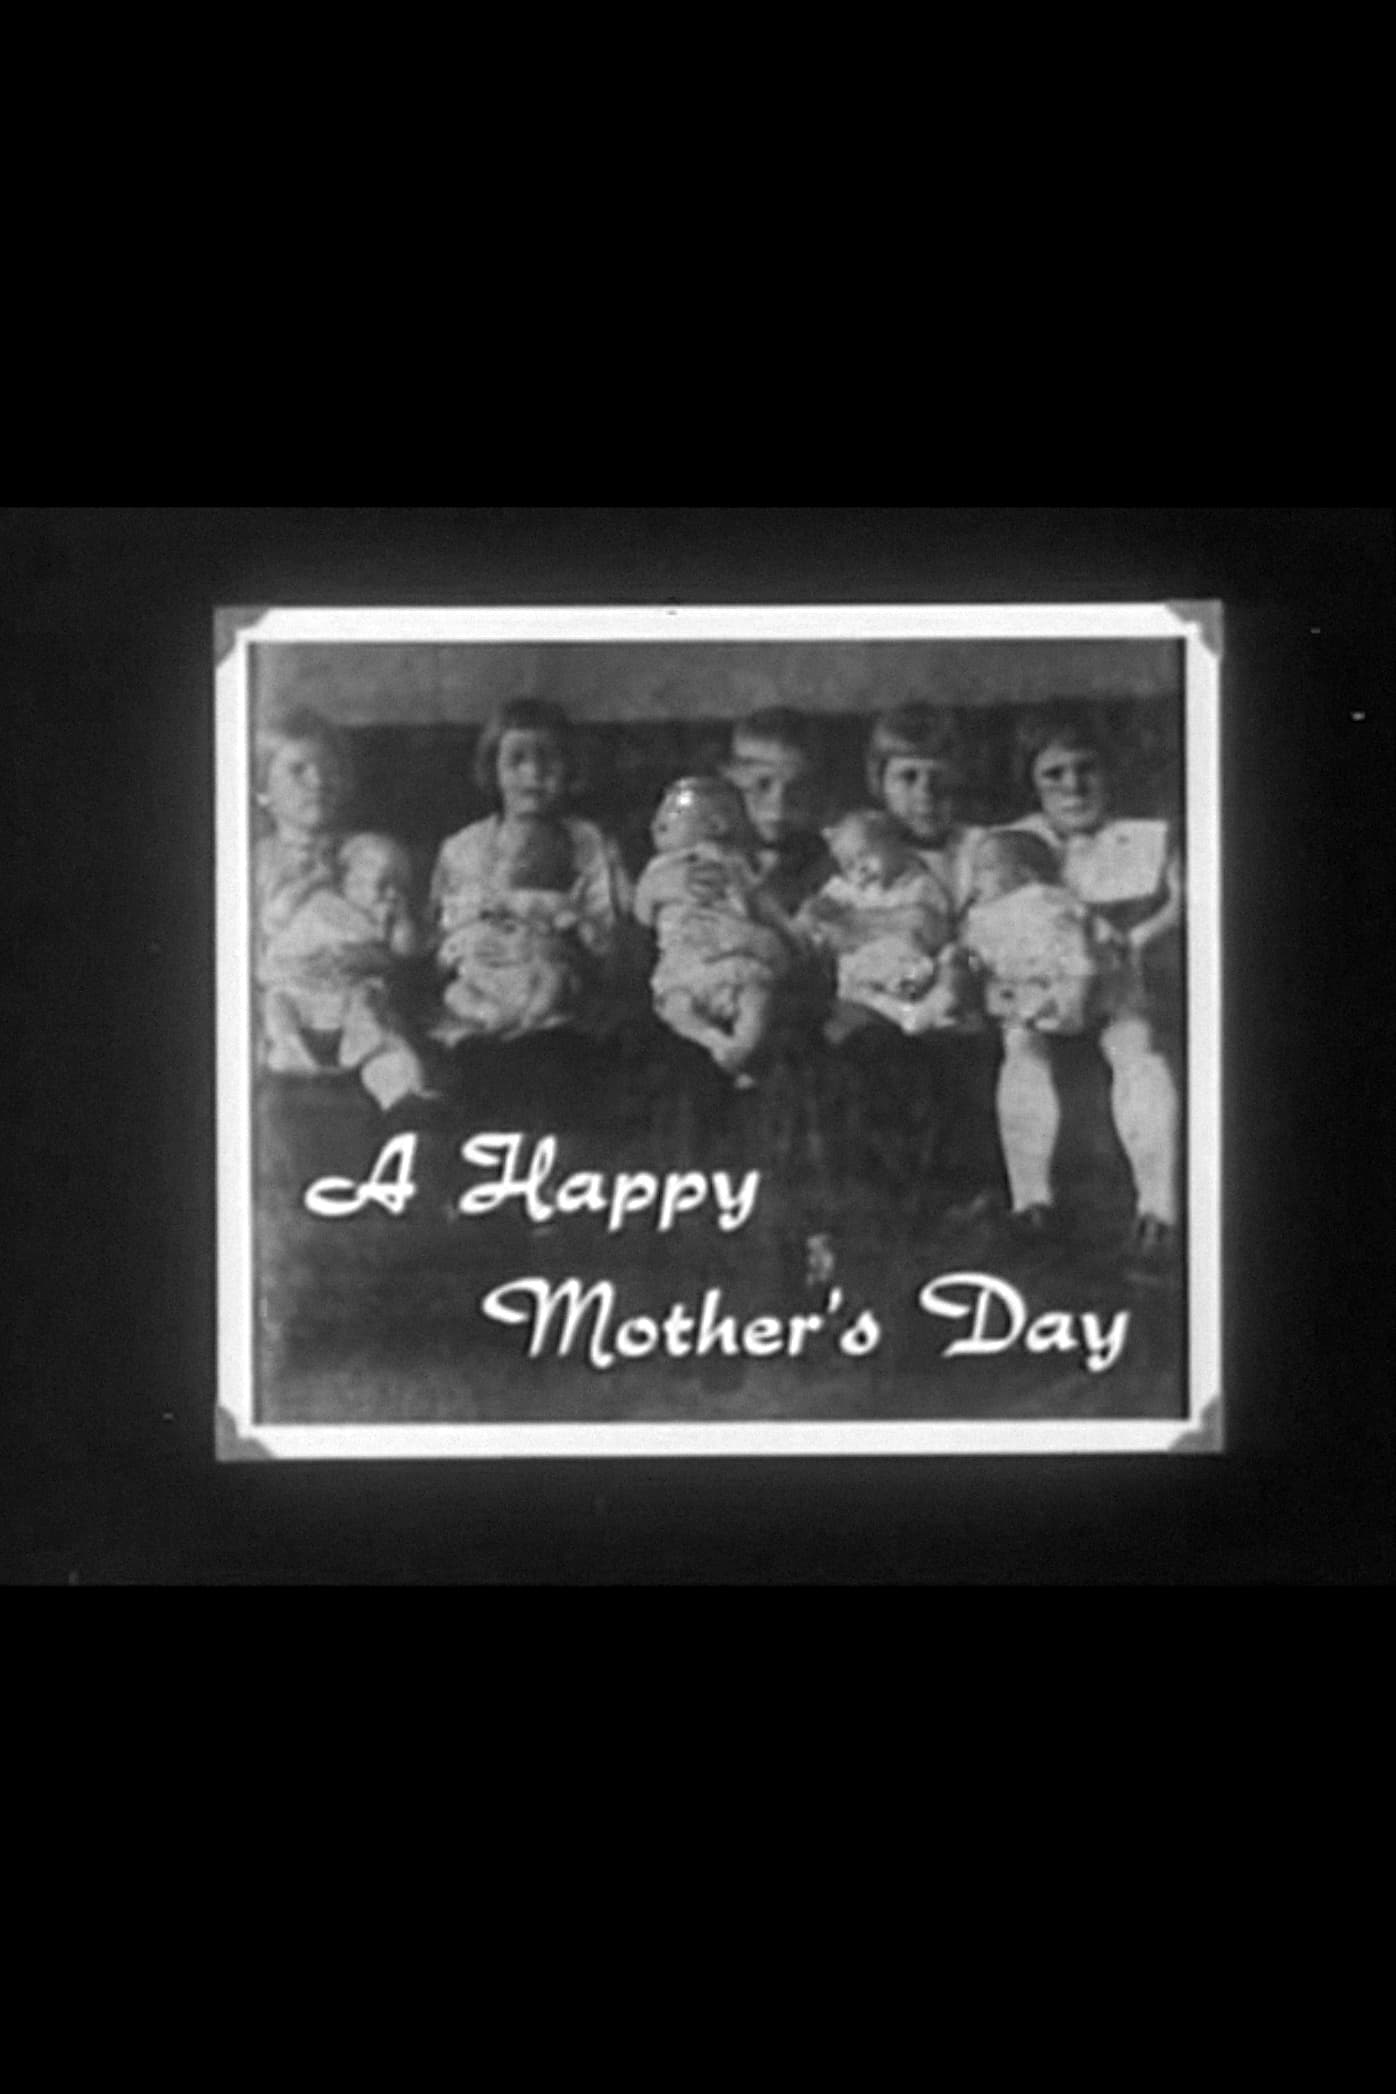 A Happy Mother's Day